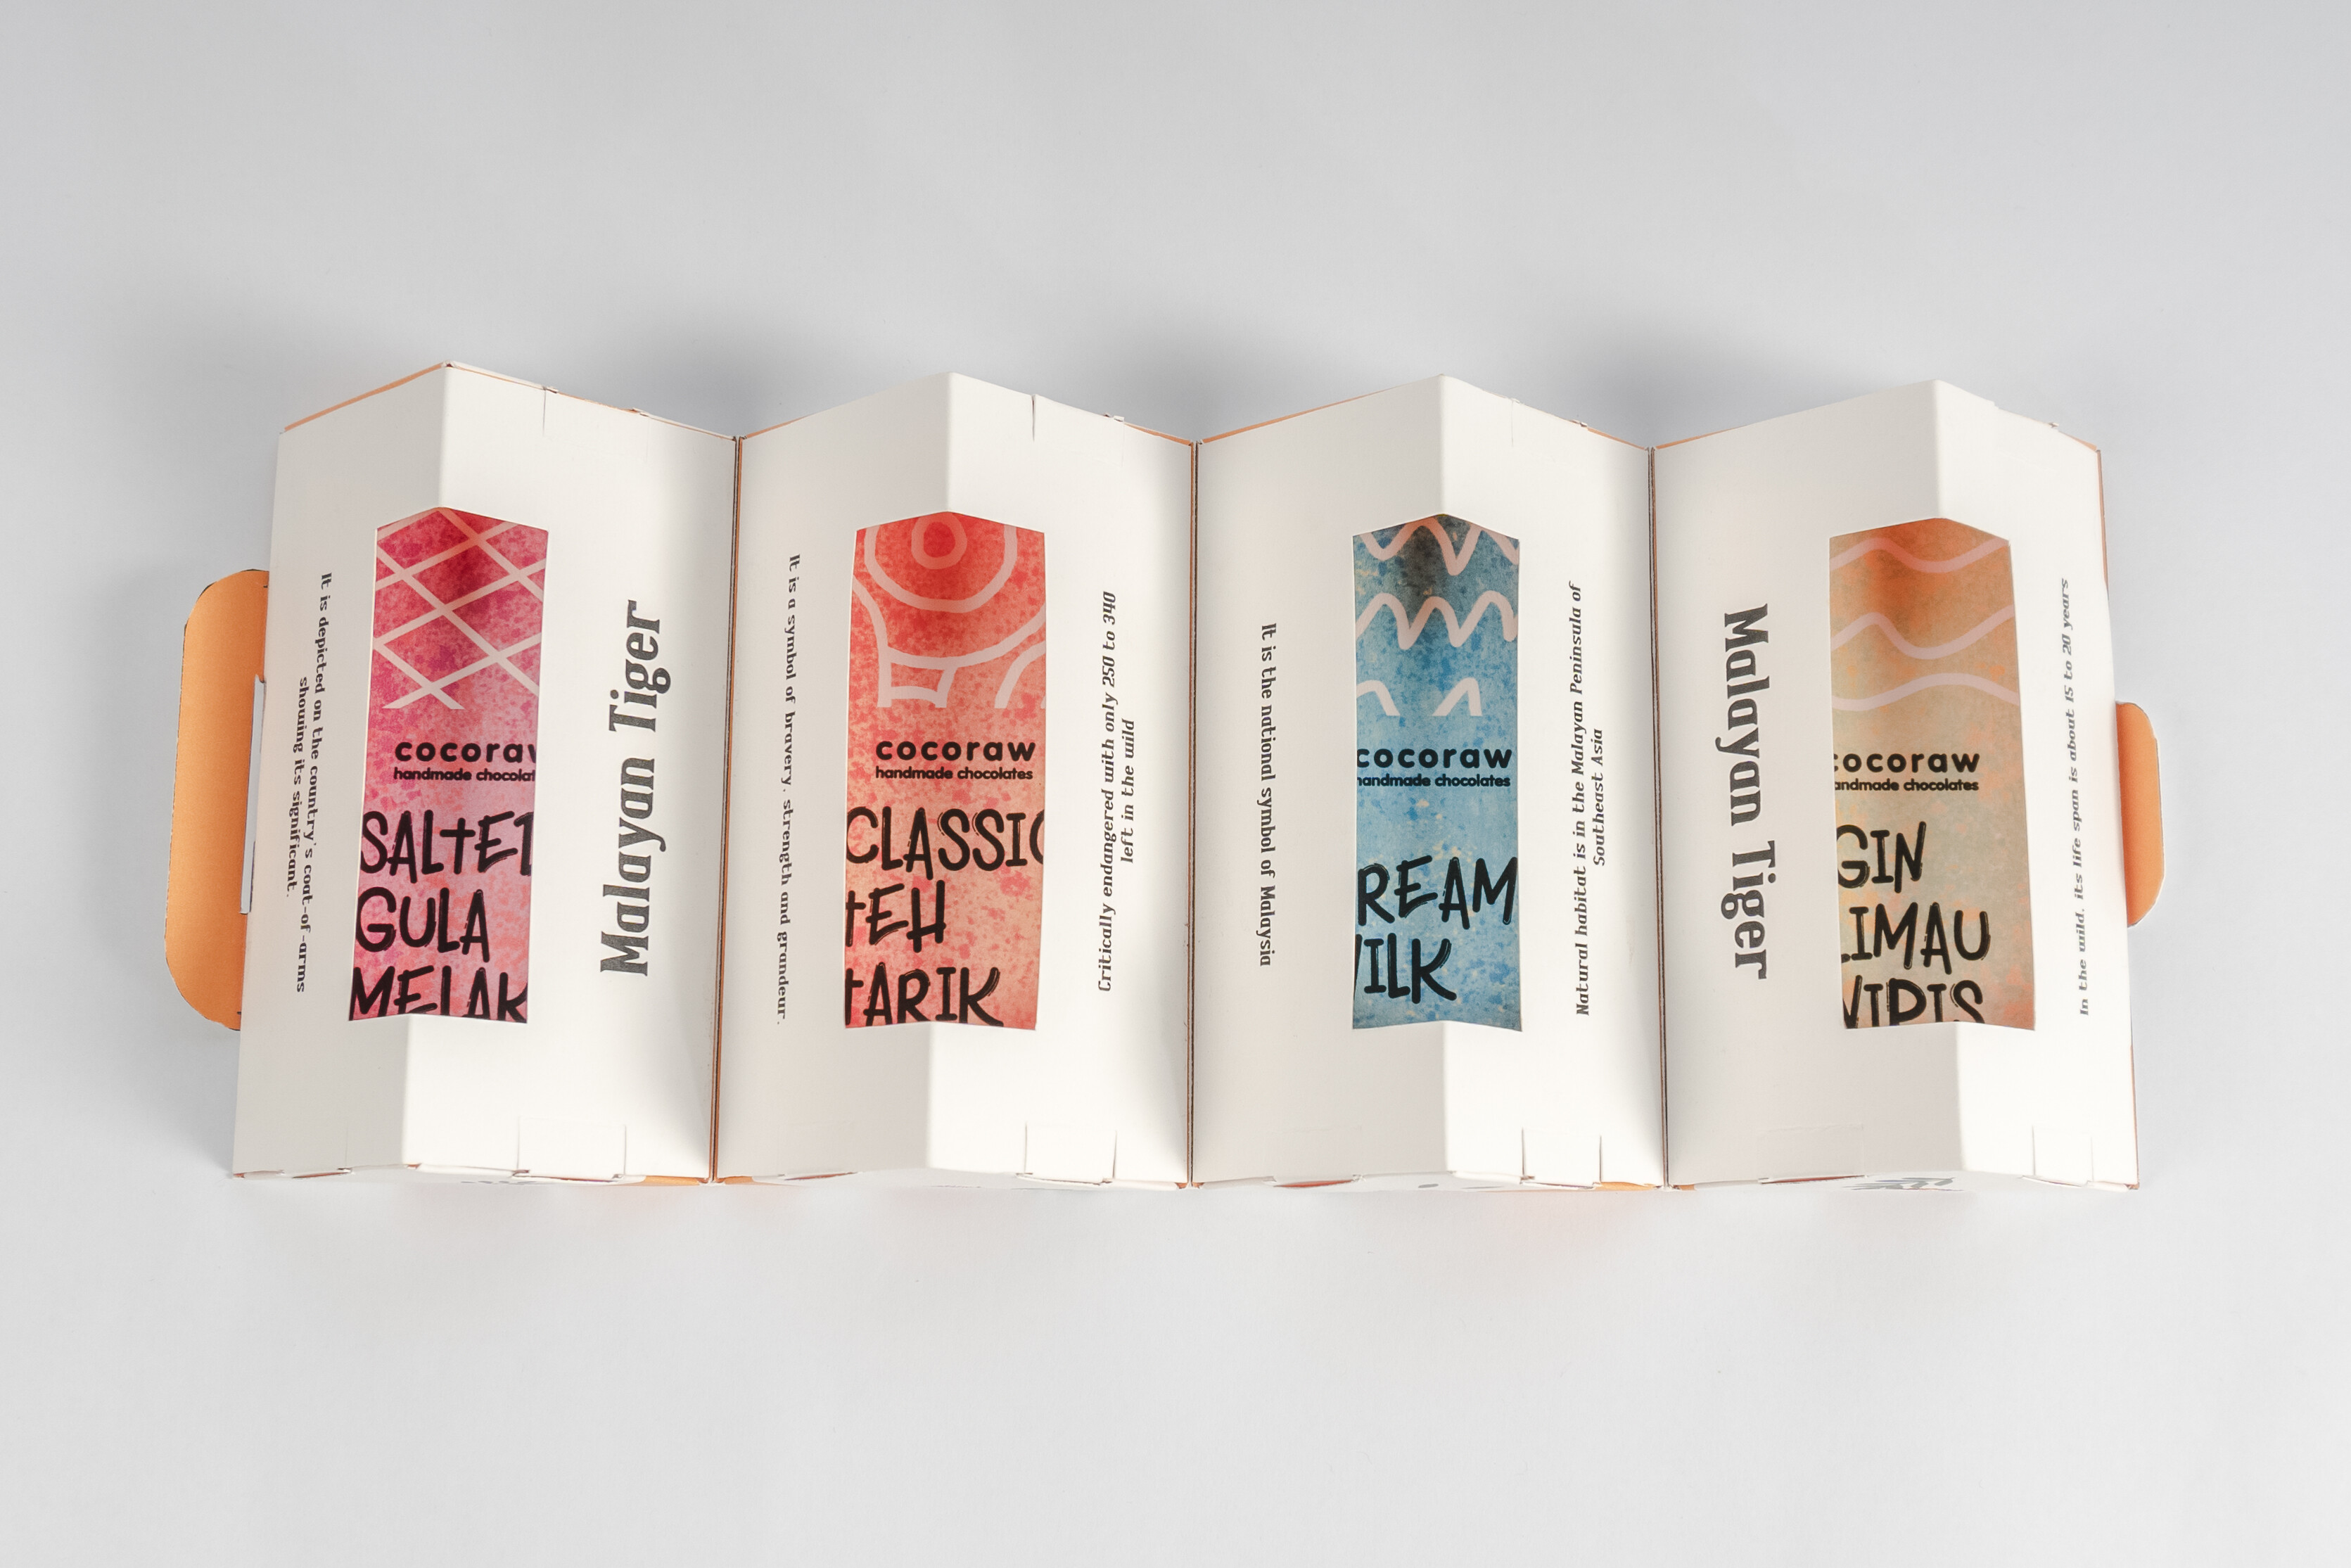 Cocoraw Chocolate Packaging Concept Design